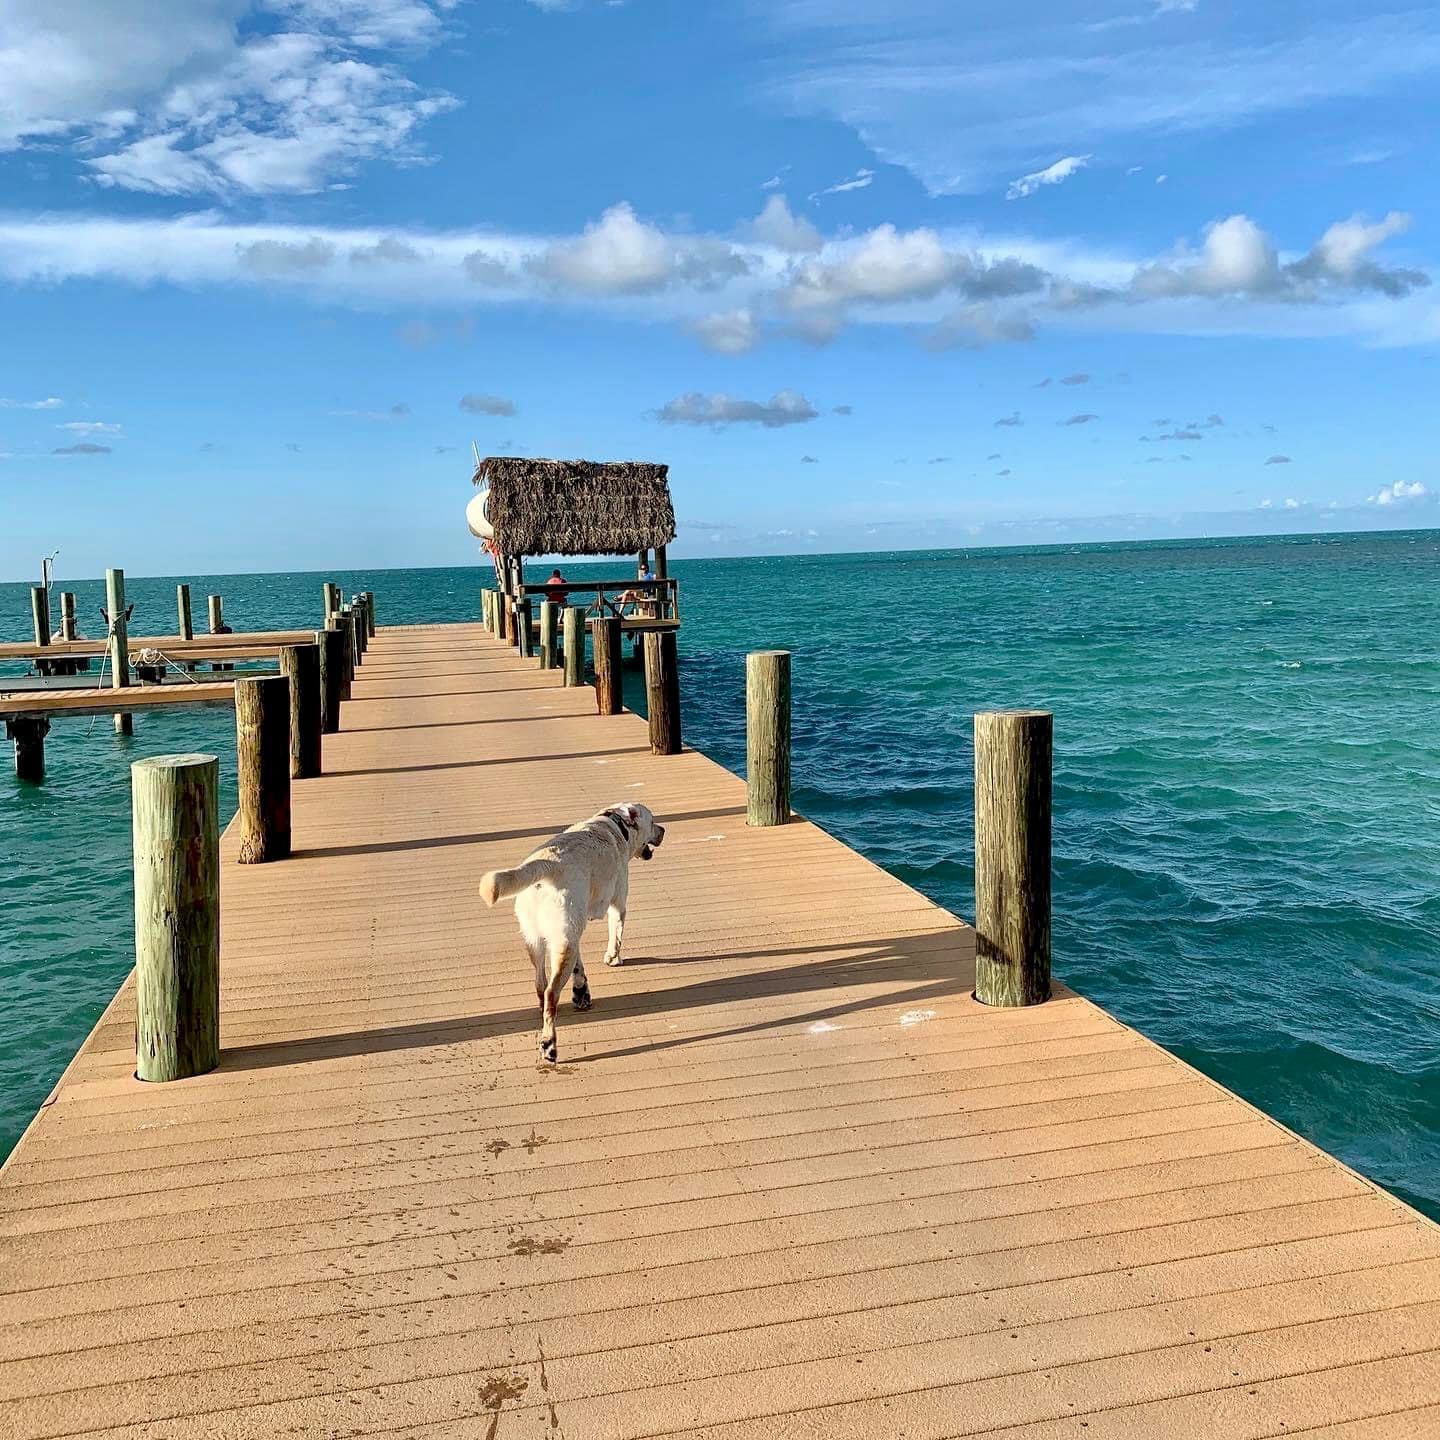 The 5-acre Pigeon Key, accessible by ferry (and pet friendly) was a camp for laborers building the 1900s-era Florida Keys Over-sea Railroad, conceived by Henry Flagler.